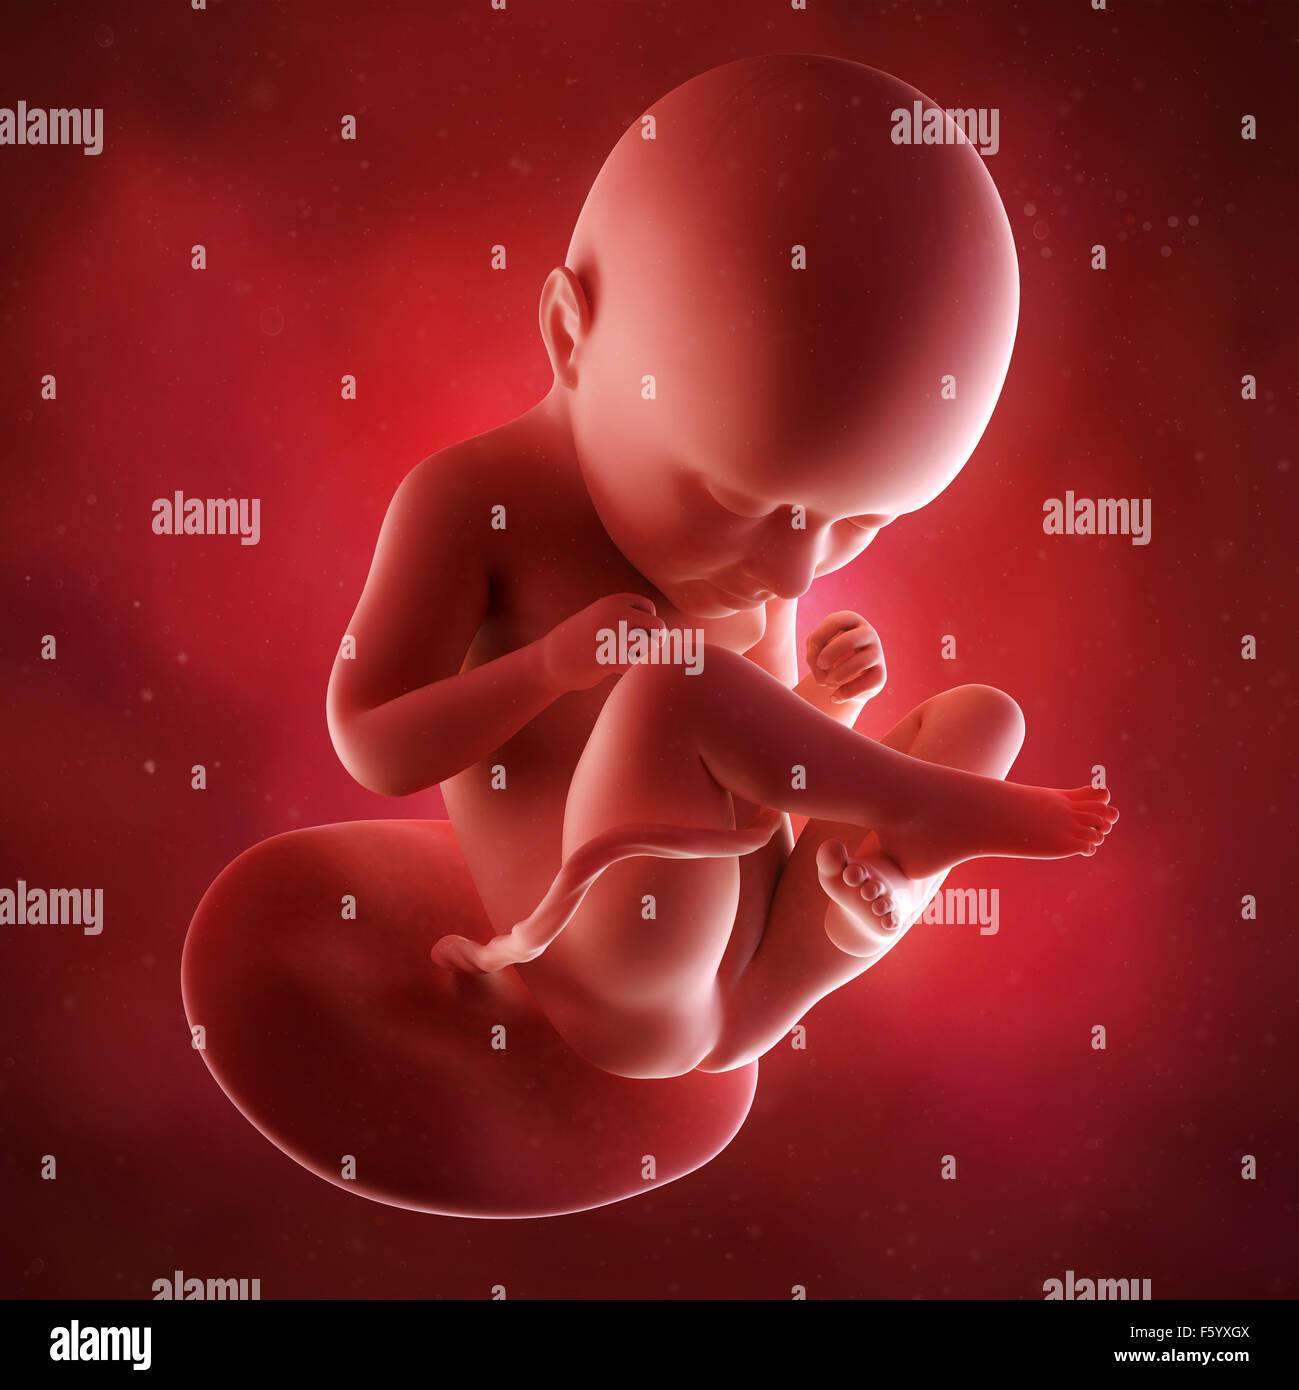 medical accurate 3d illustration of a fetus week 35 Stock Photo